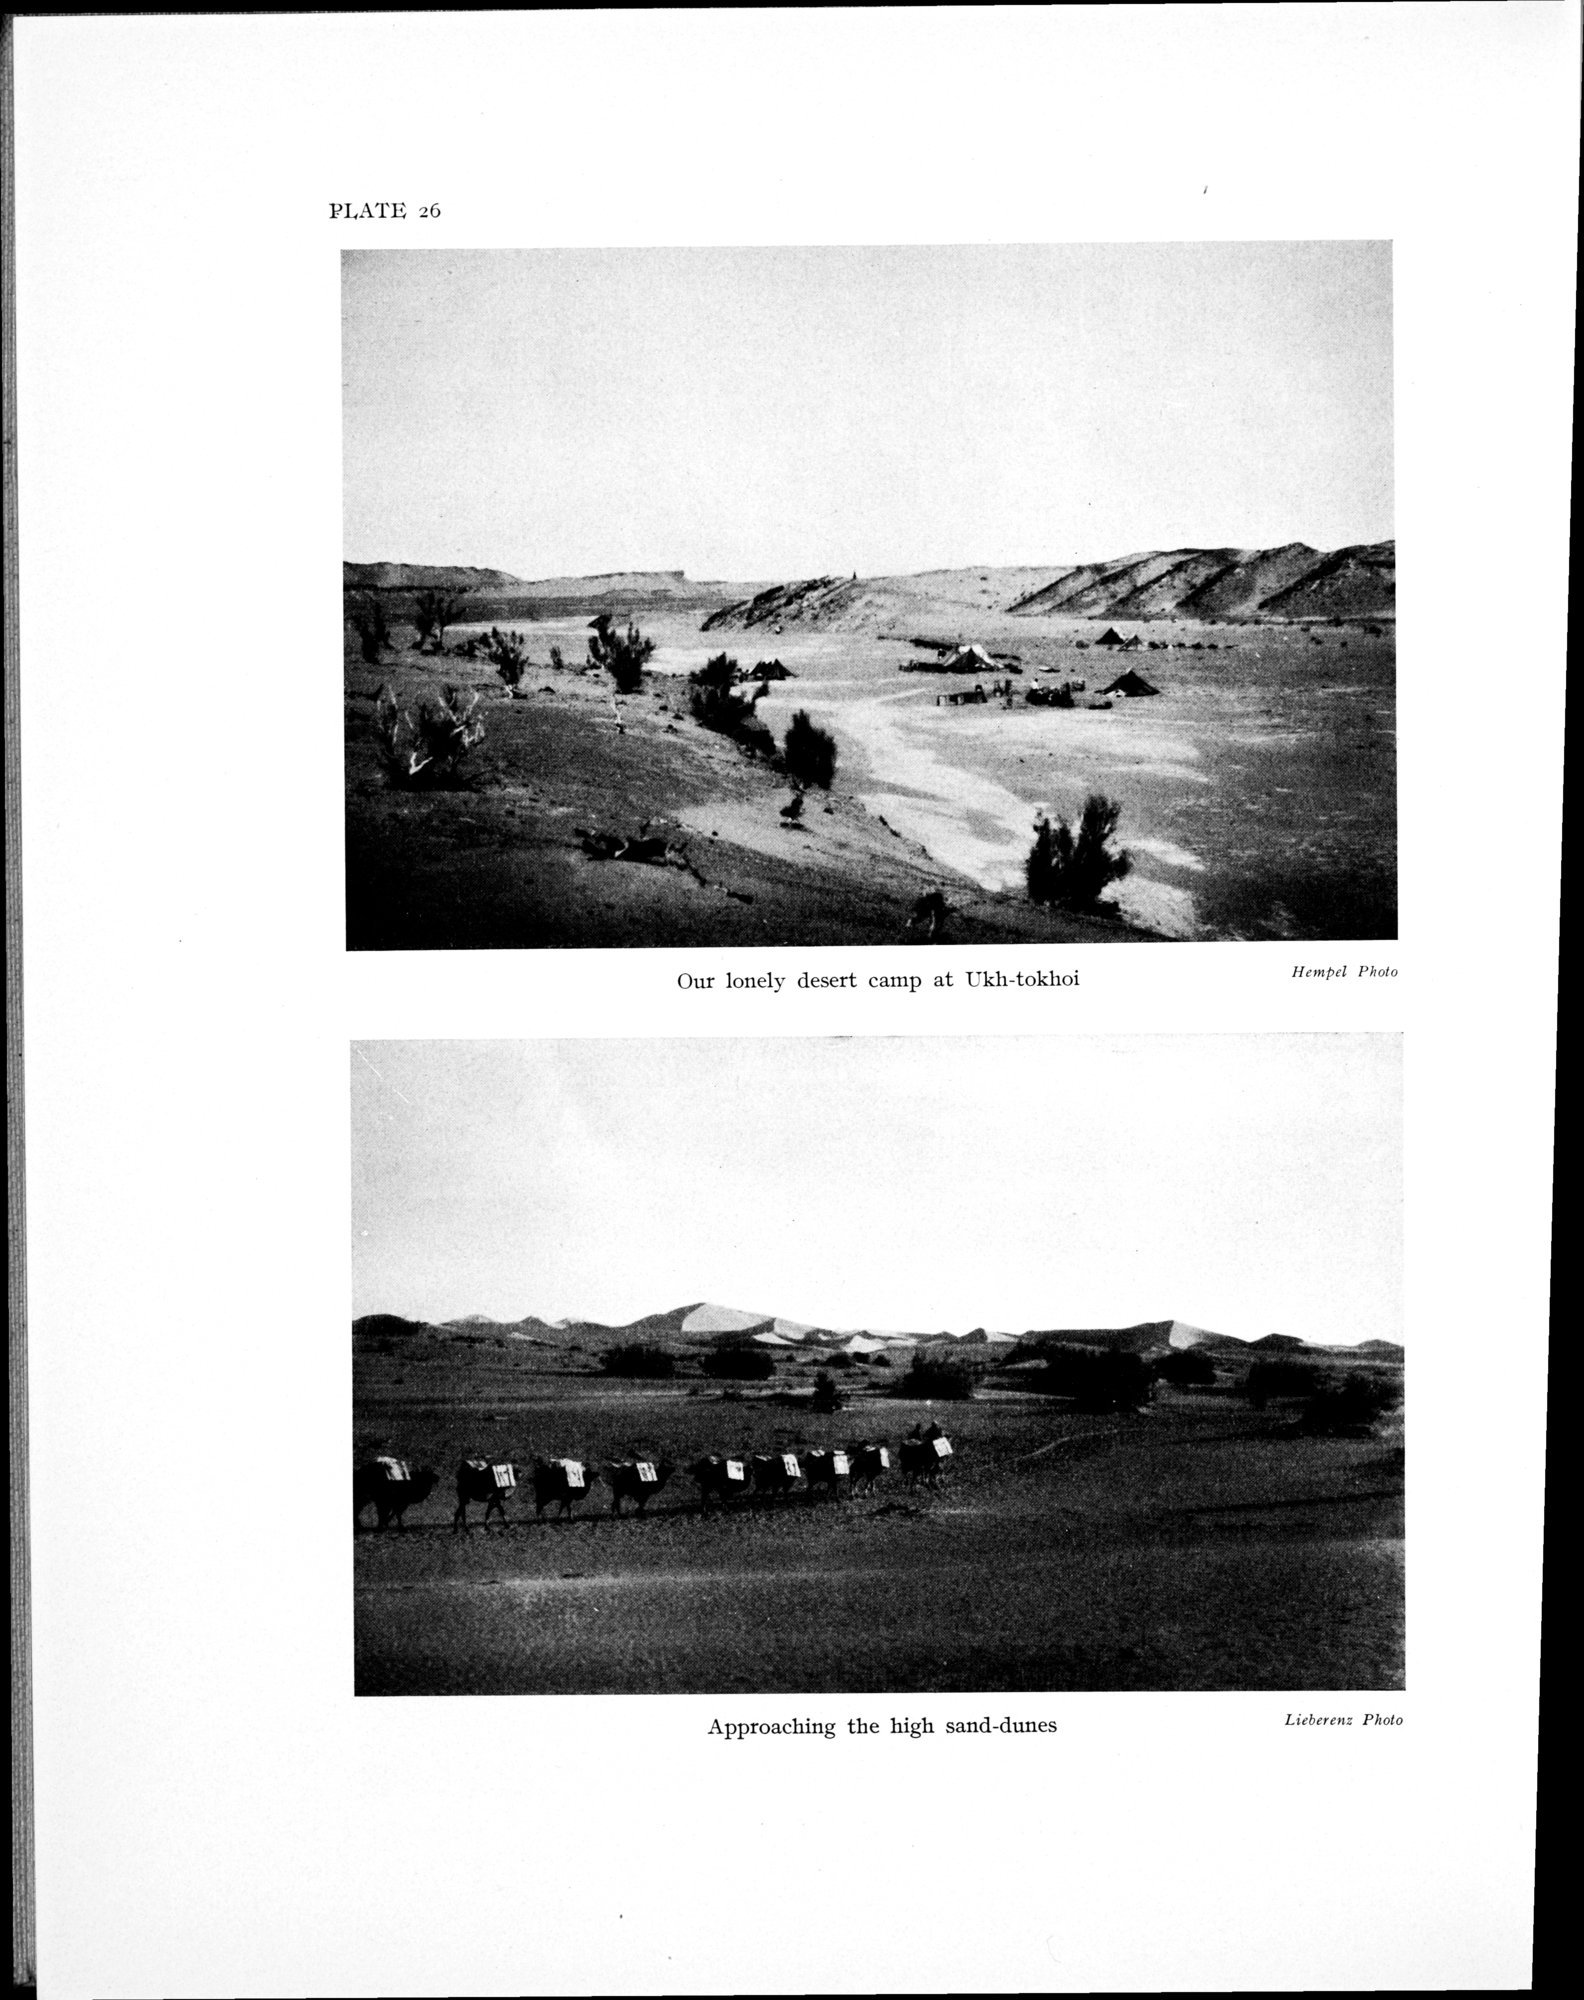 History of the Expedition in Asia, 1927-1935 : vol.1 / Page 204 (Grayscale High Resolution Image)